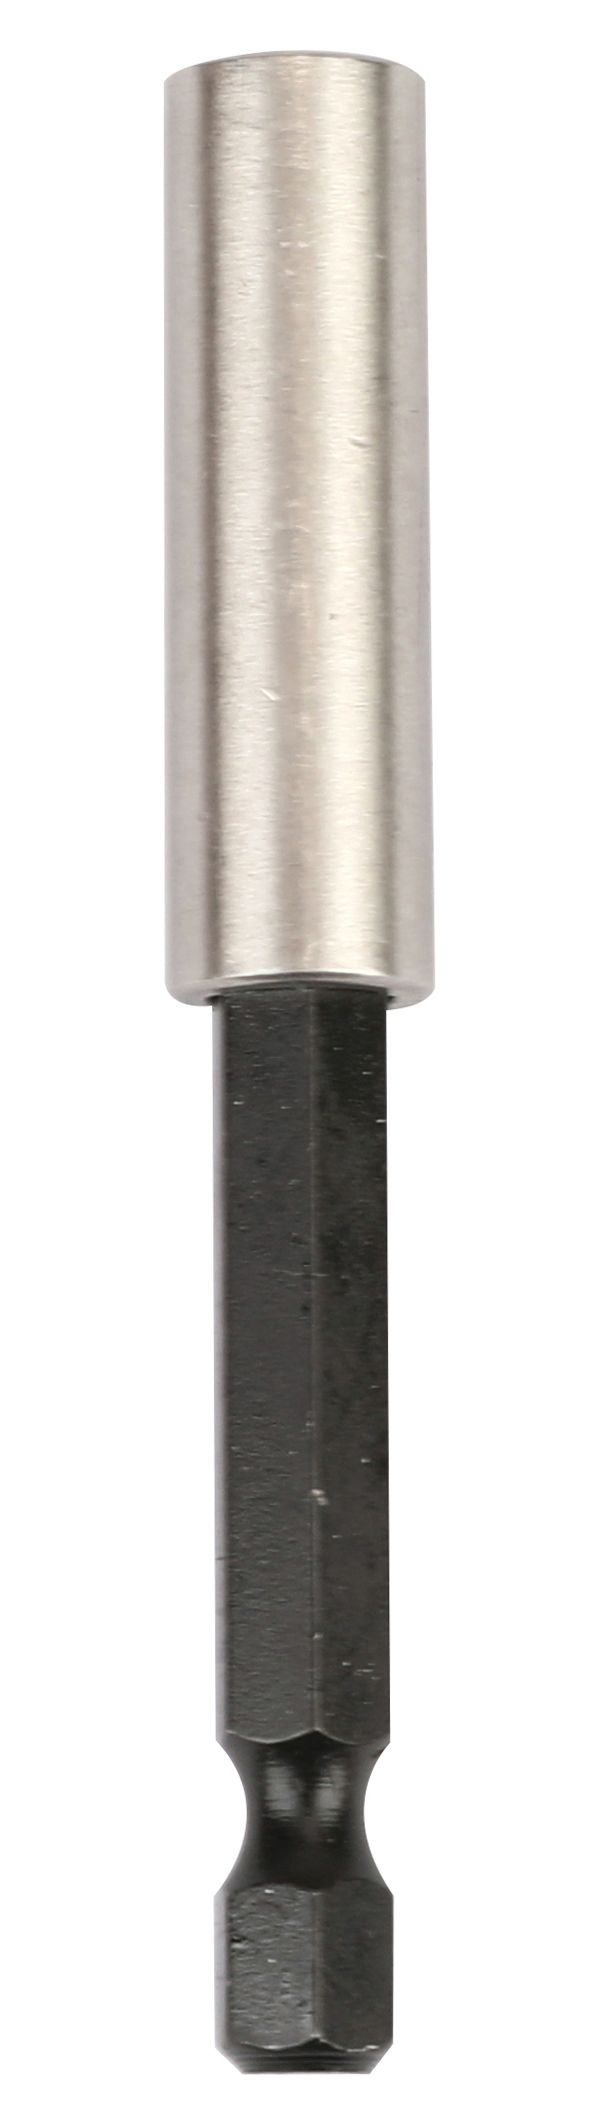 Image of Wickes Magnetic Screwdriver Bit Holder 75mm